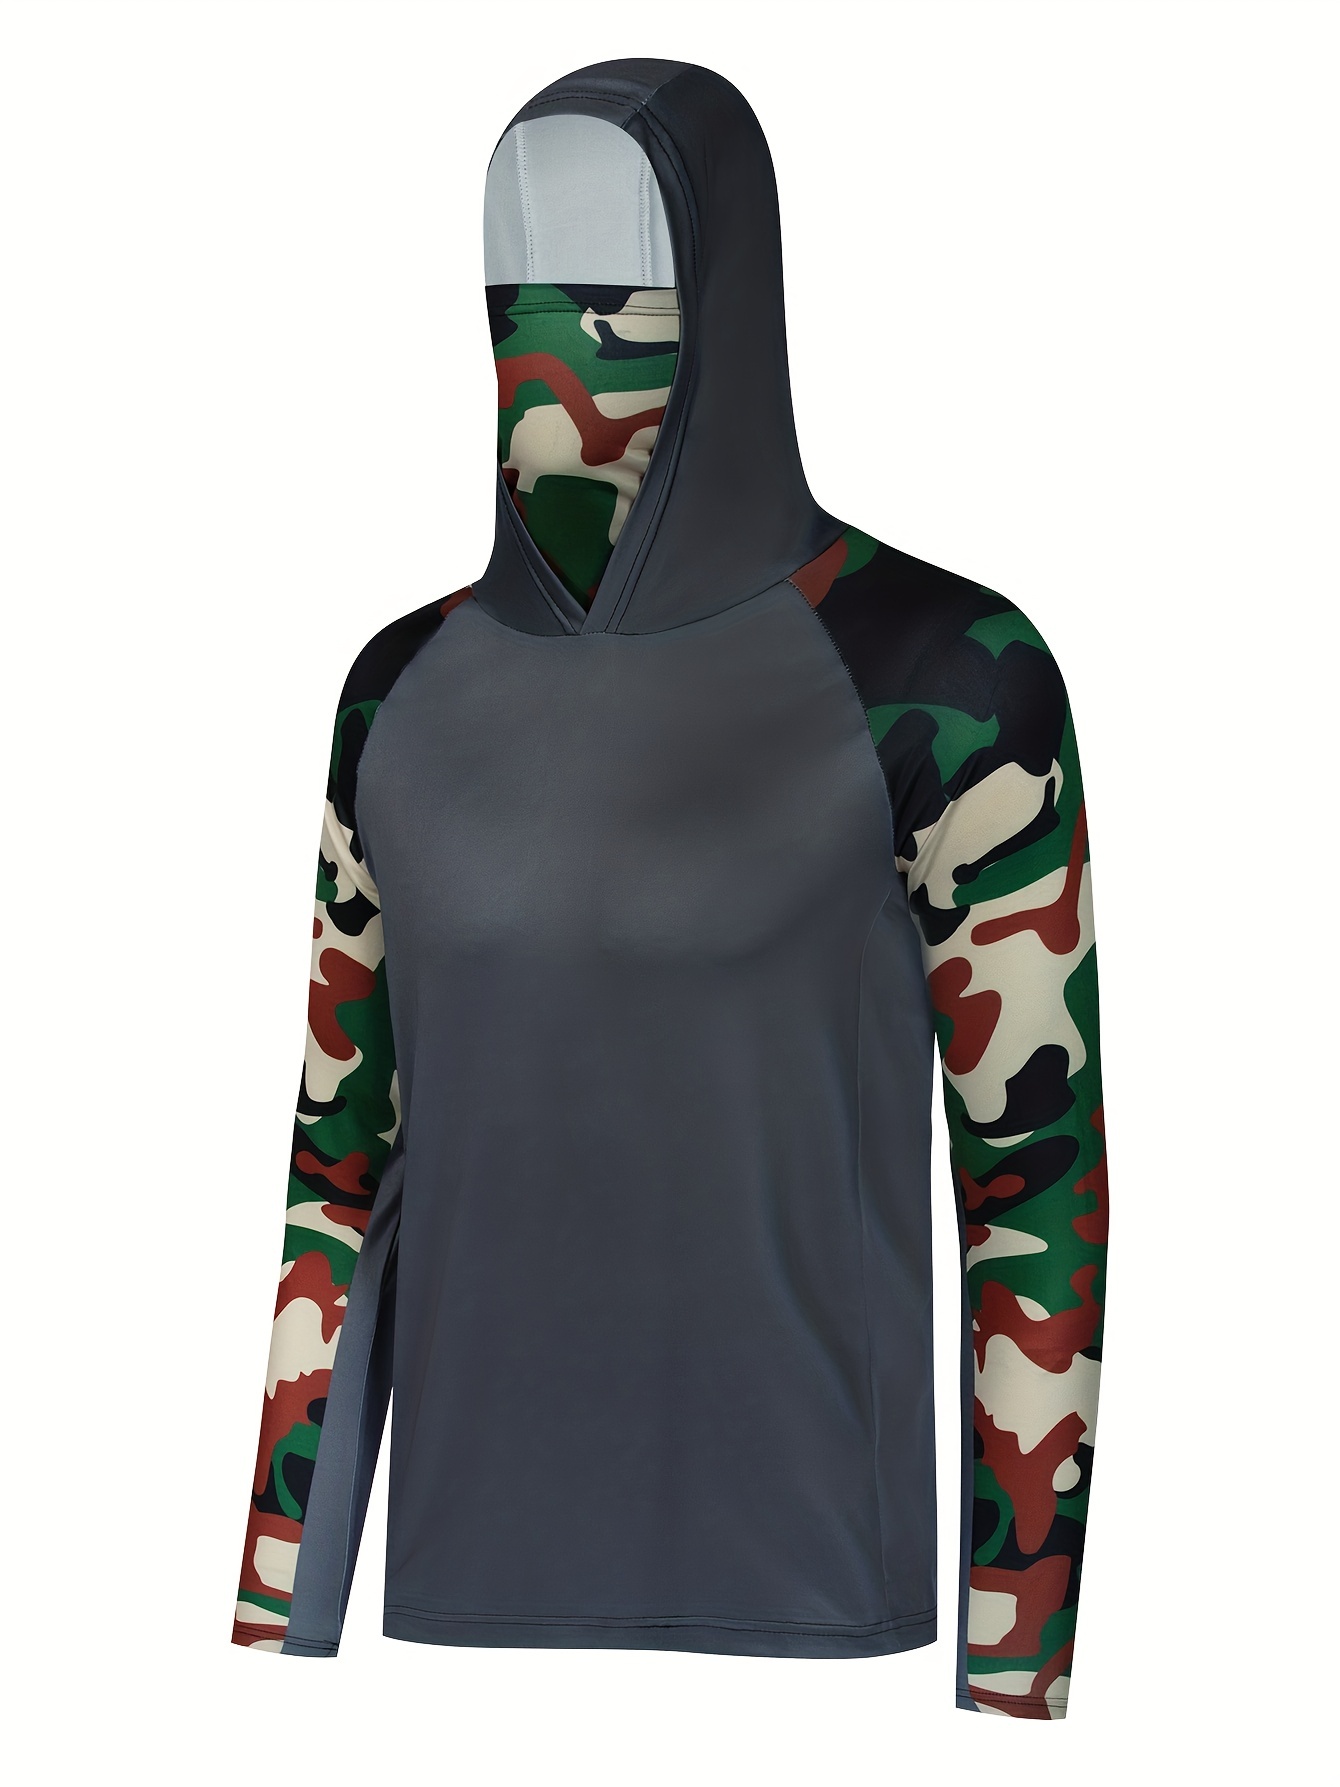 Men's Raglan Sleeve With Camouflage Pattern Hoodie With Mask, Anti-UV Sunscreen Sun Protection Fishing Shirt Breathable Quick Dry Hooded Fishing